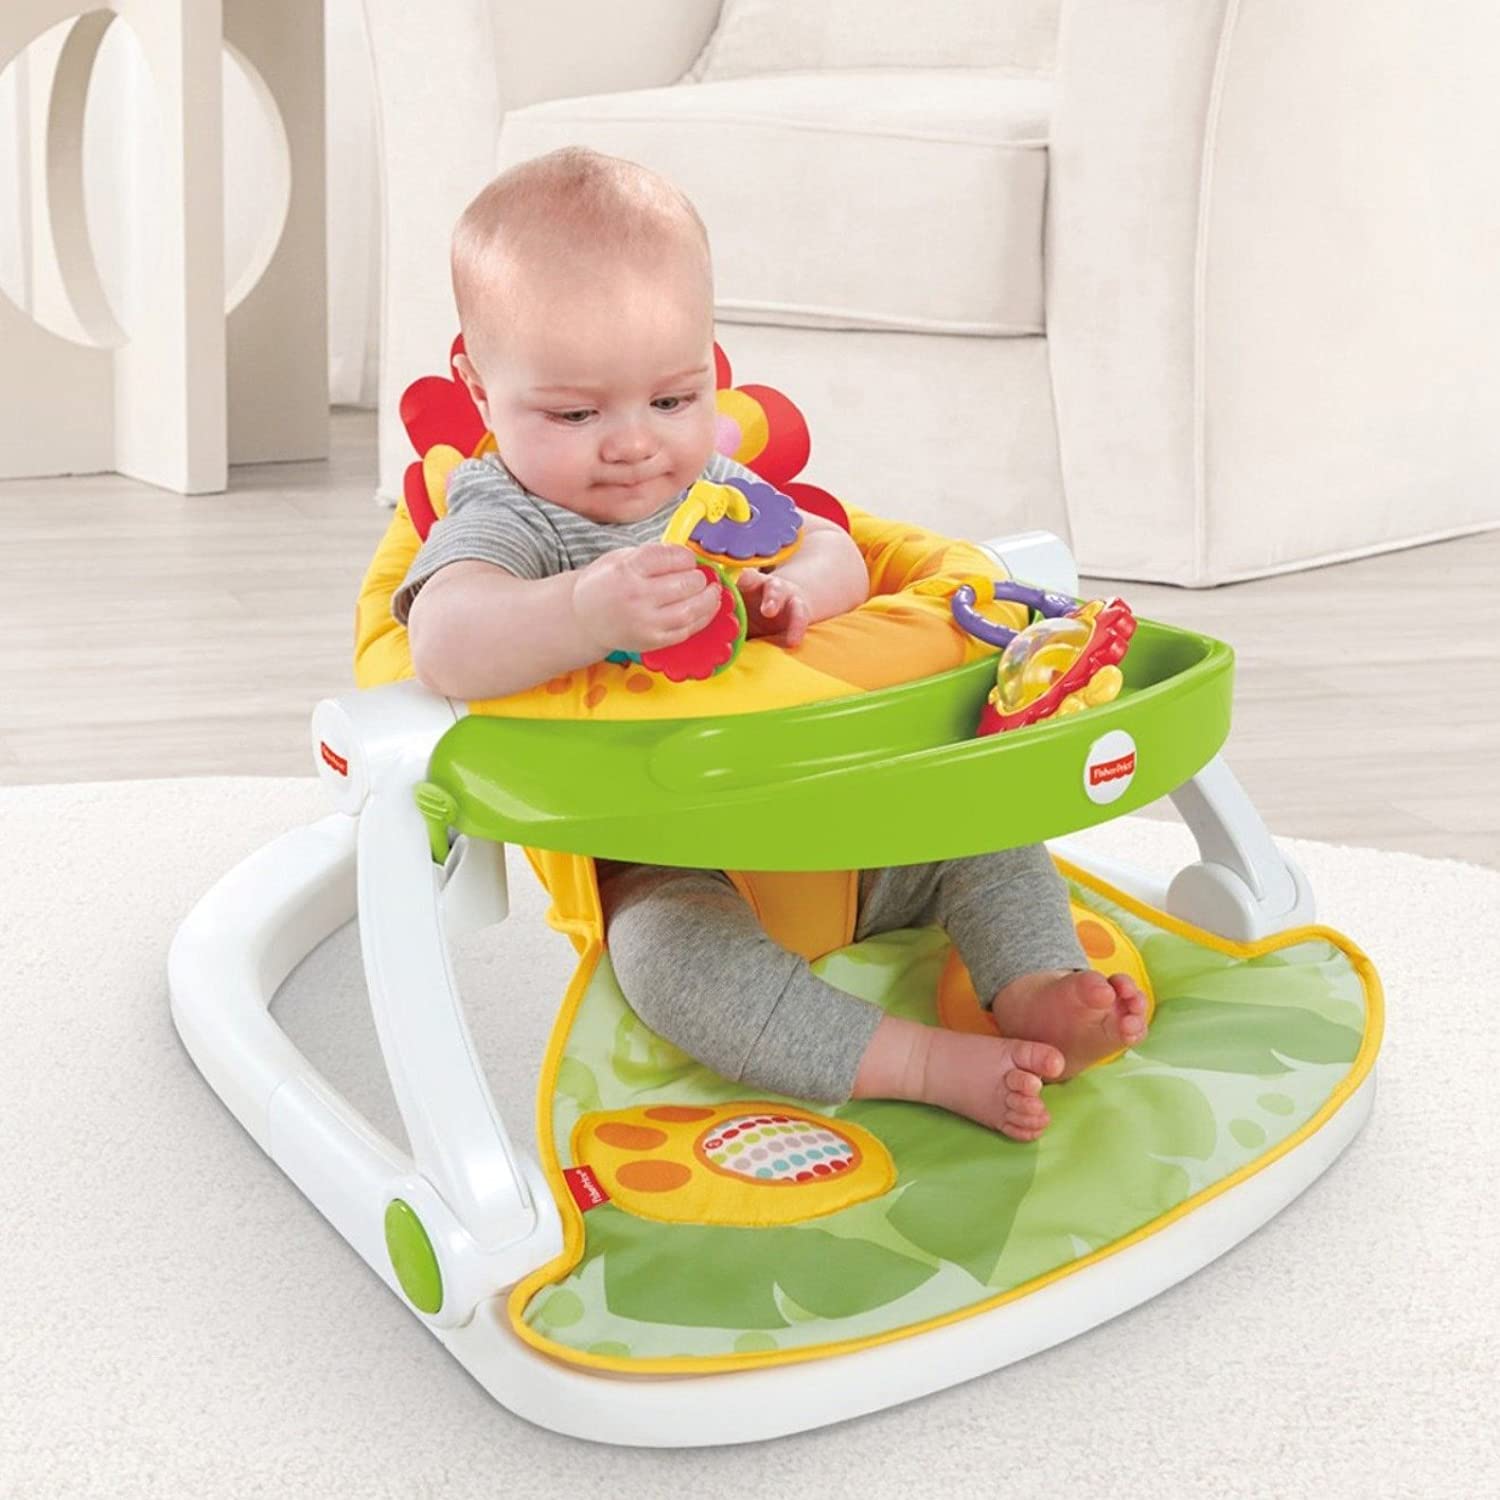 Fisher-Price Sit-Me-Up Floor Seat, Lion - with Toy Tray, Portable Infant Chair